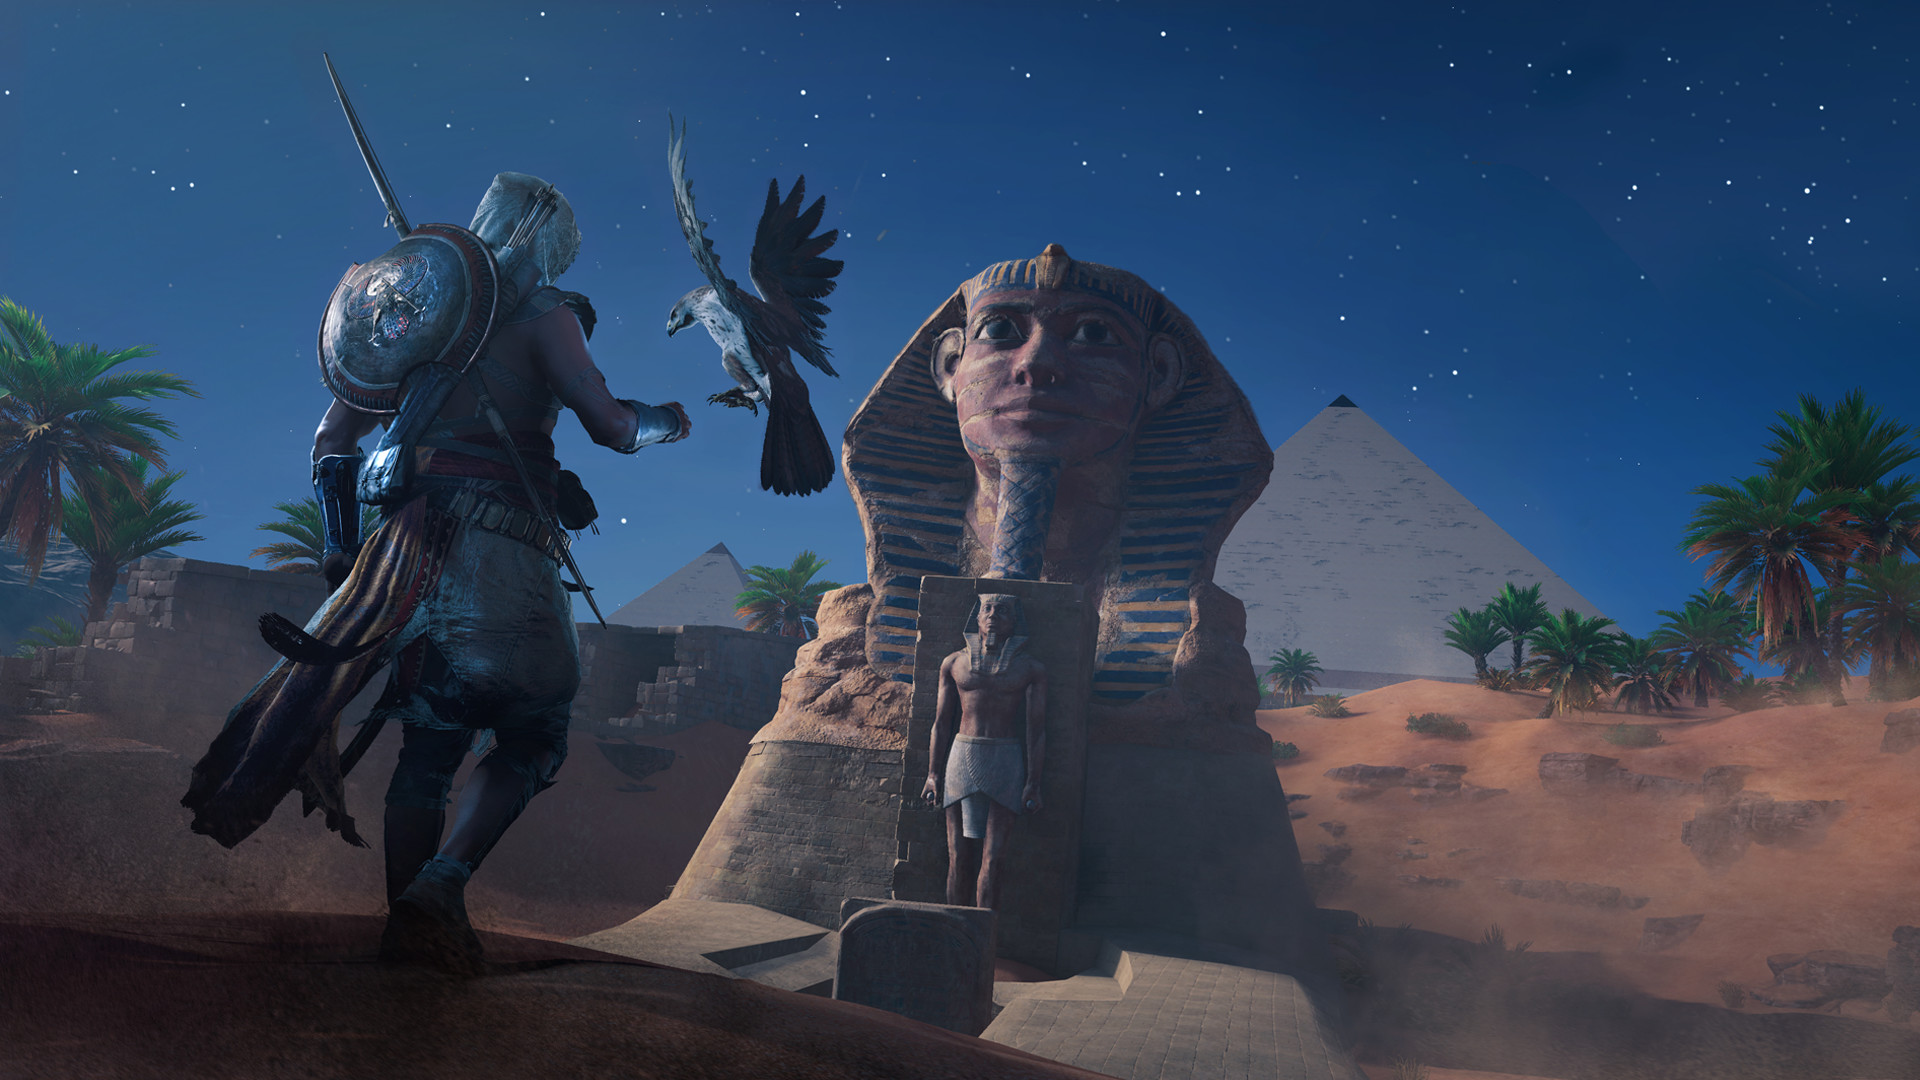 Can I play Assassin's Creed Origins with a dual core CPU, 6GB RAM